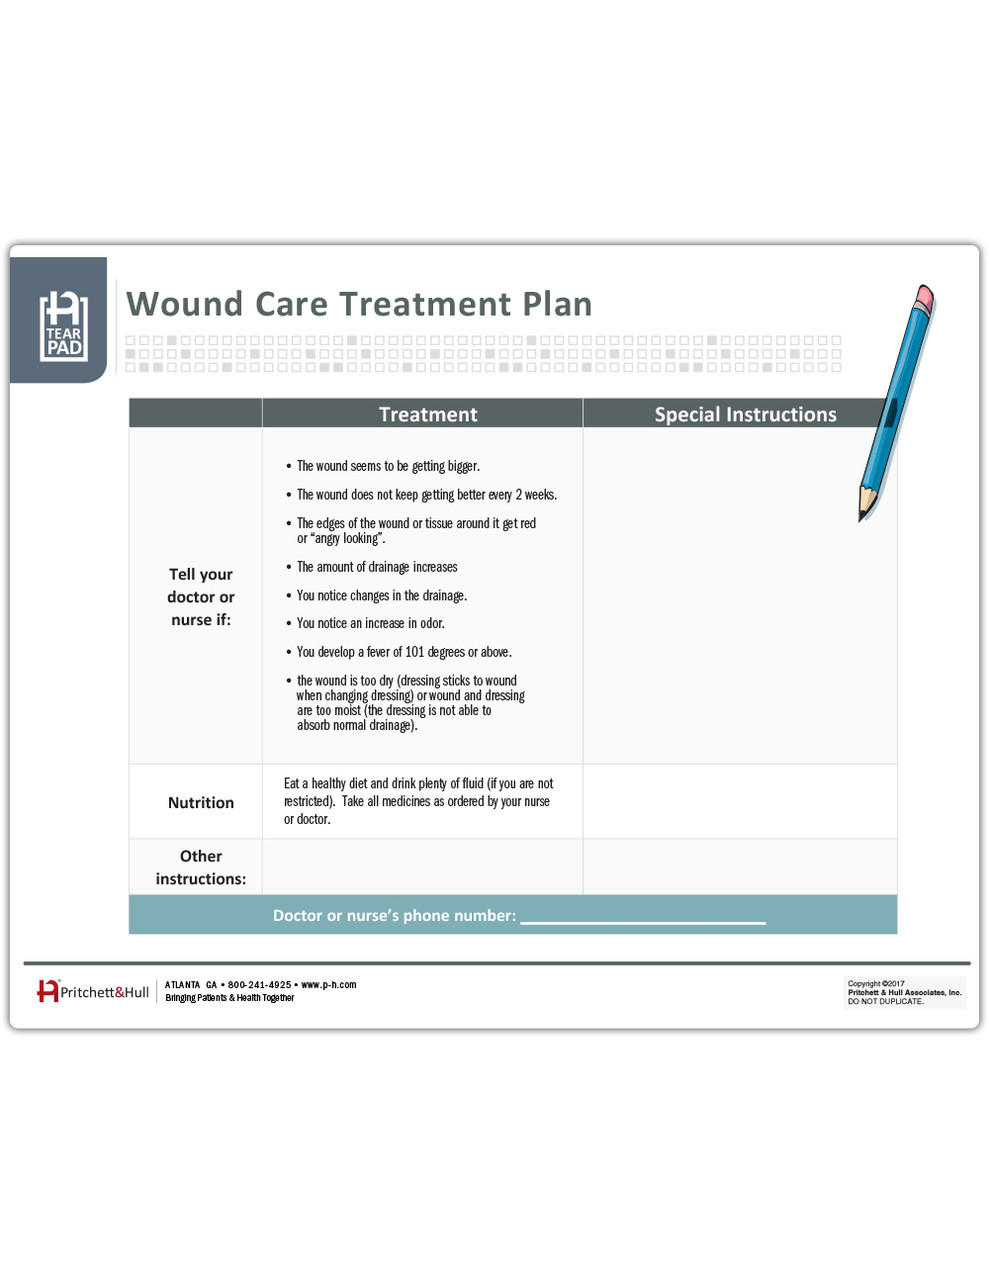 Wound Care Treatment Plan Tearpad 50 Sheets Per Pad Pritchett And Hull